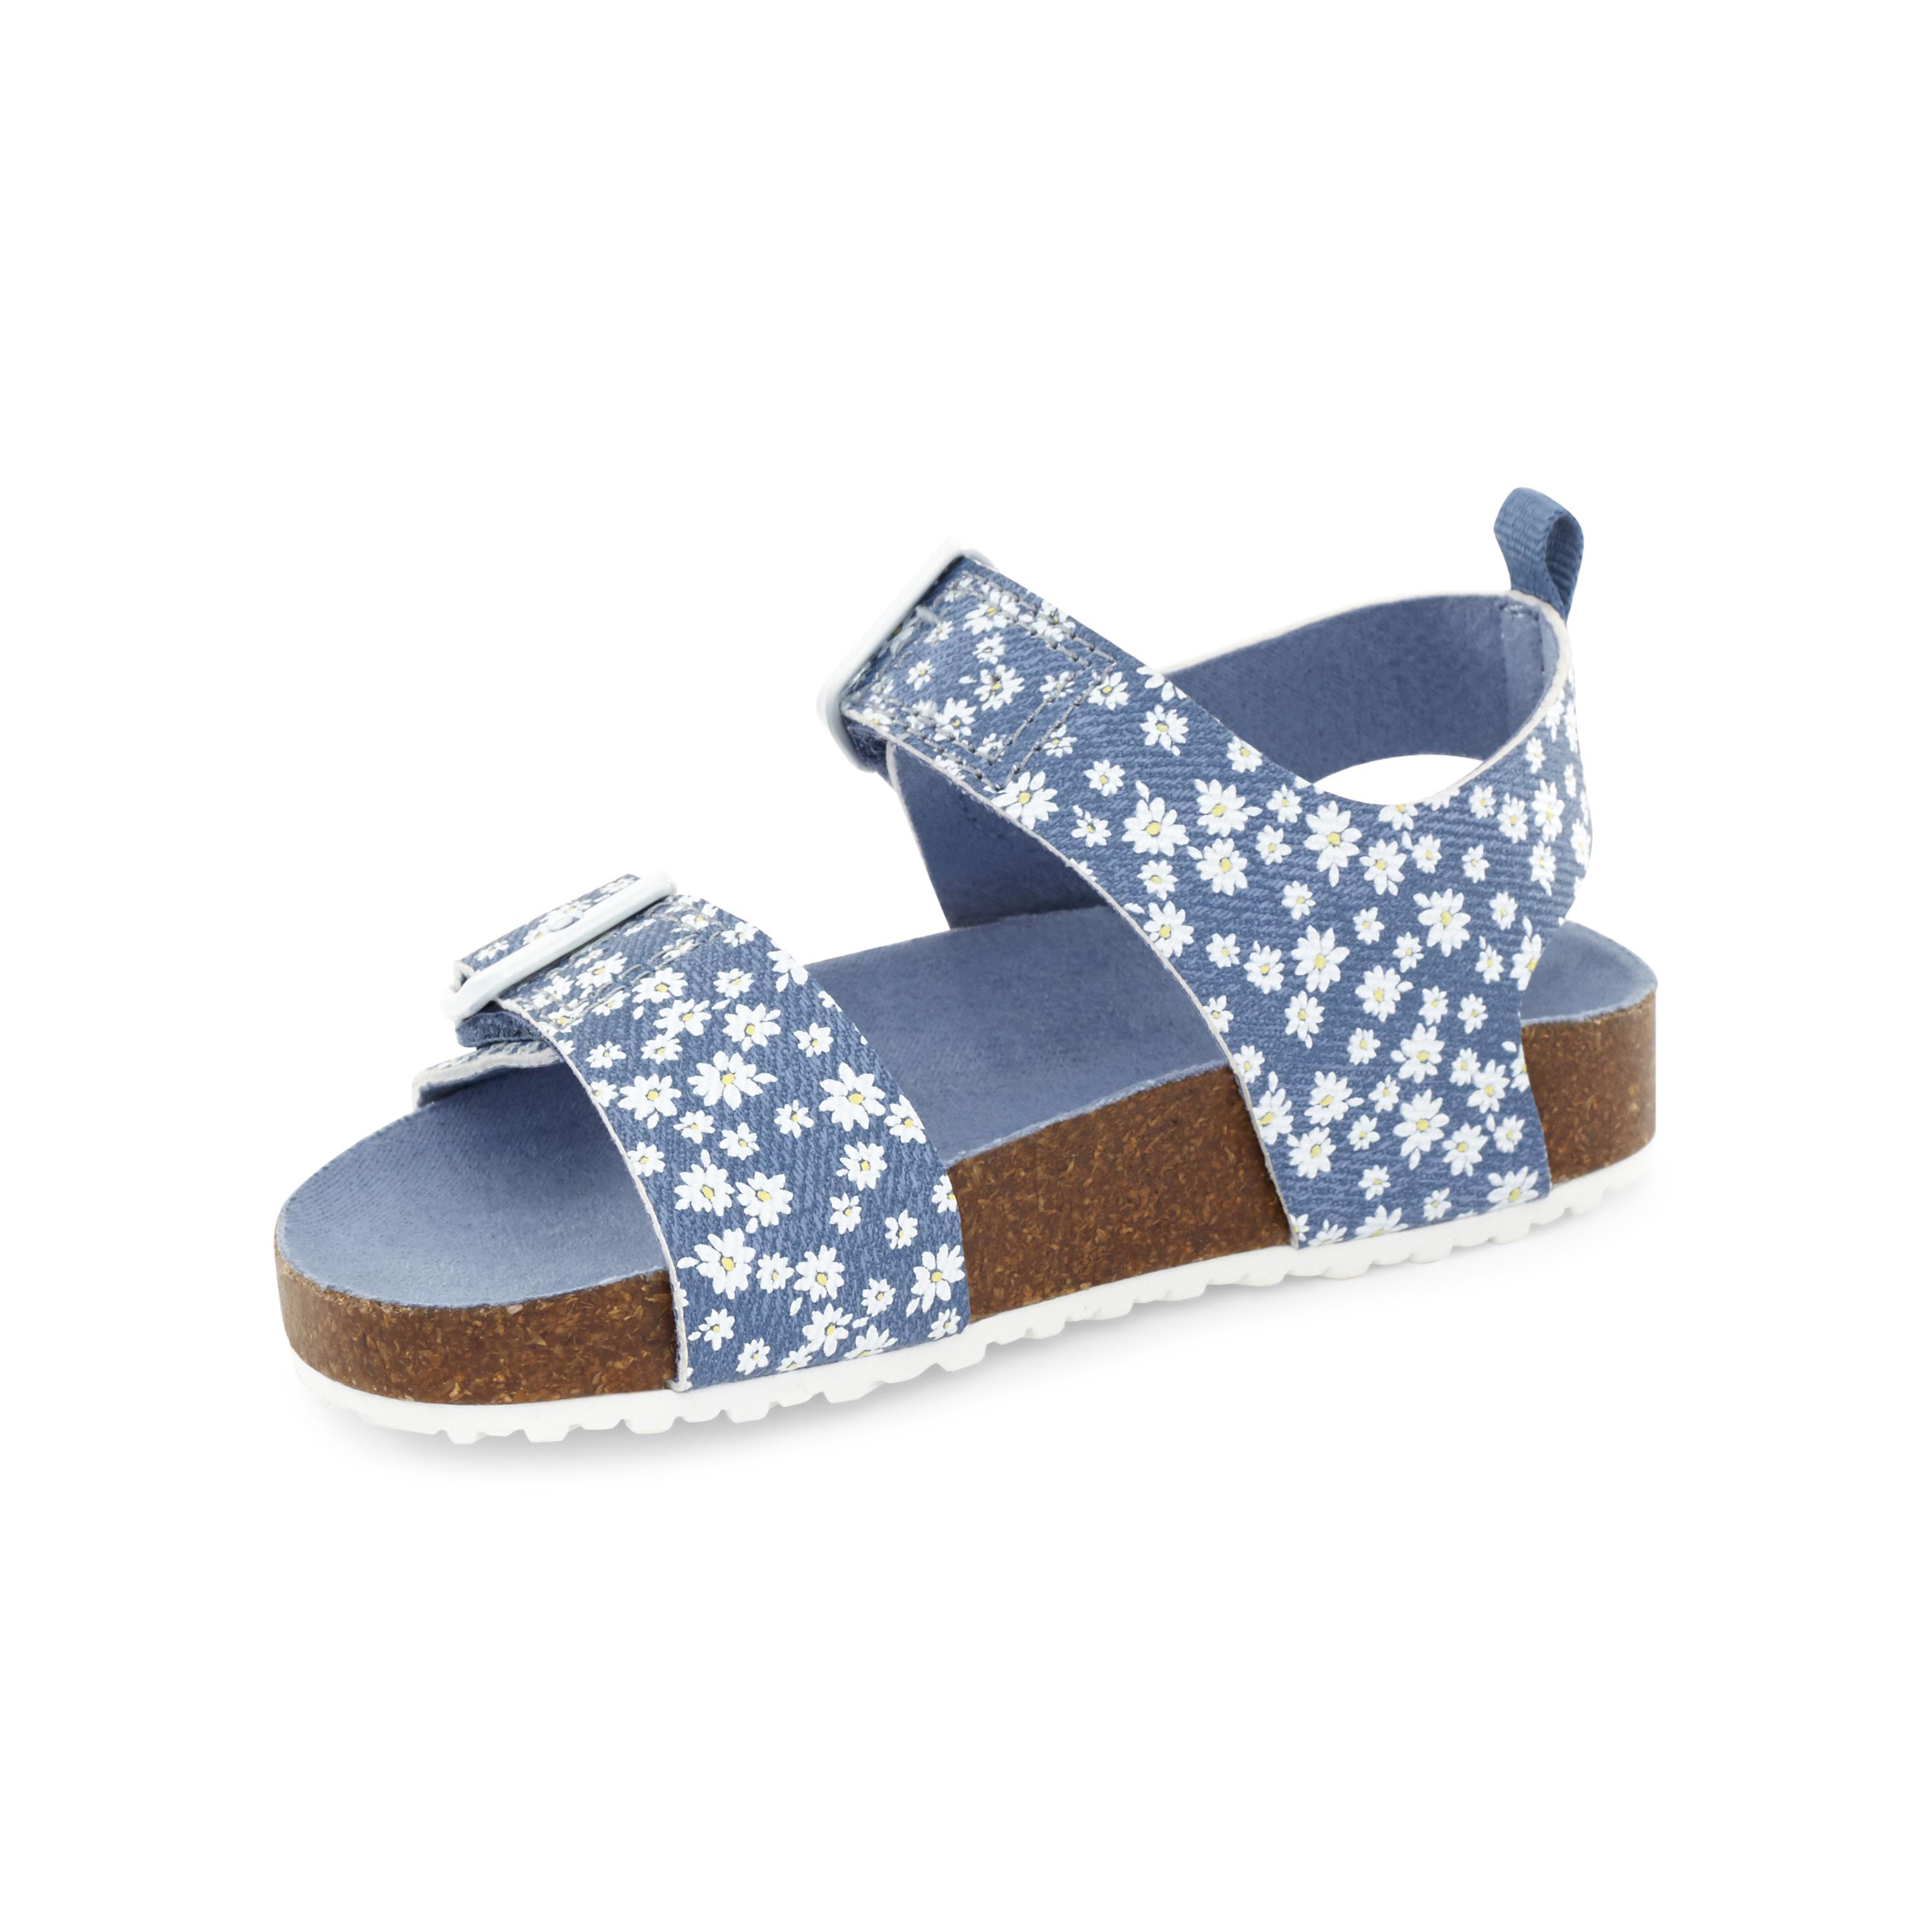 Toddler Daisy Buckle Footbed Sandals